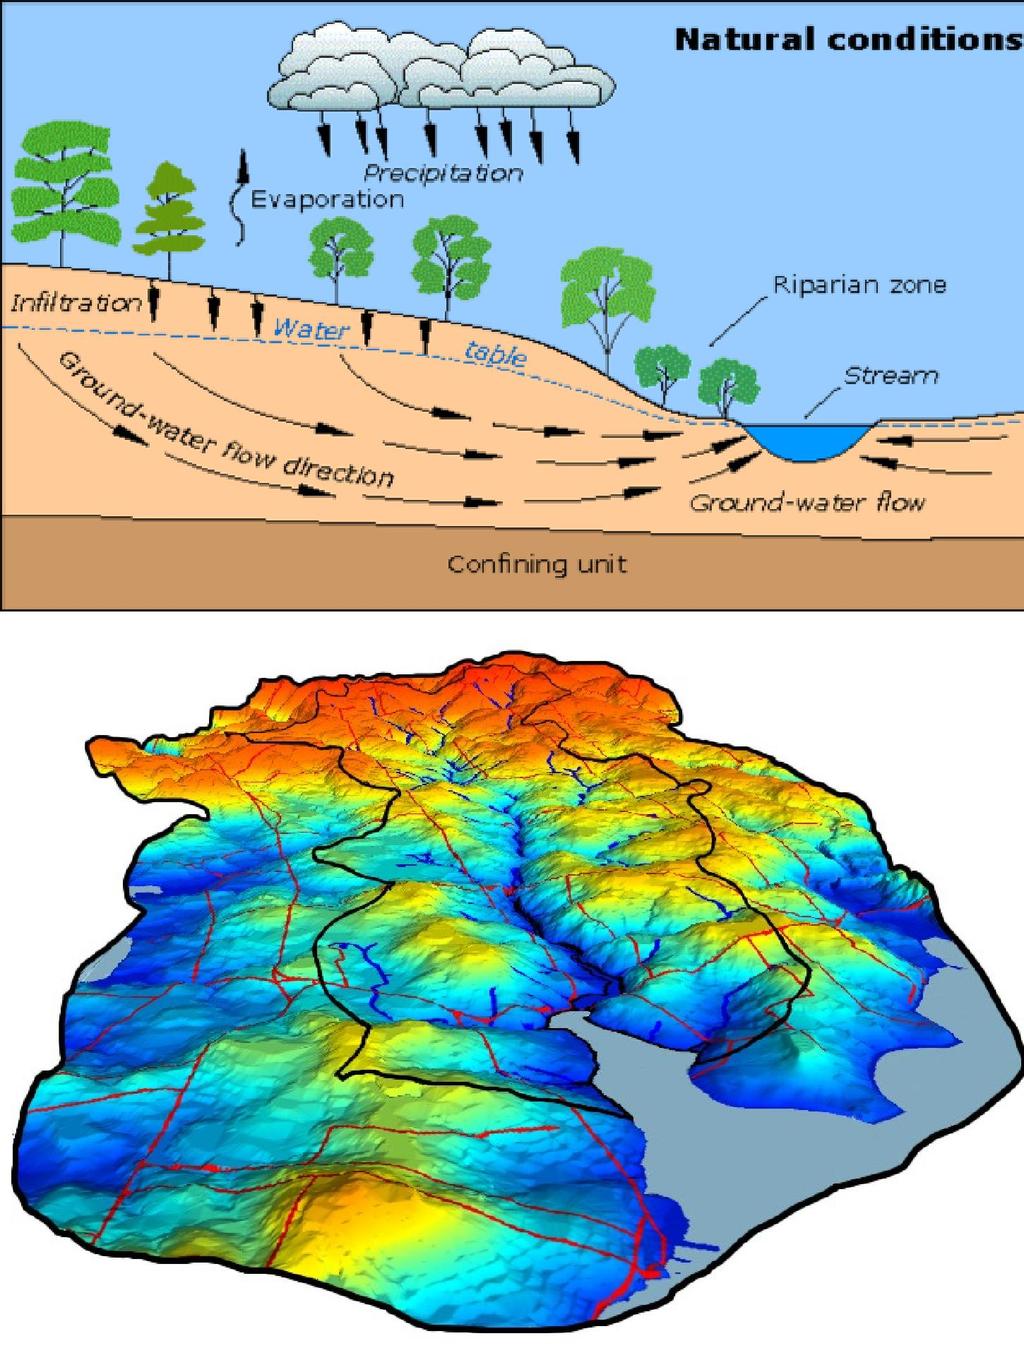 Groundwater Flow Systems Groundwater is not static but flows from areas of higher elevation to lower elevation, where it discharges to streams or the ocean.